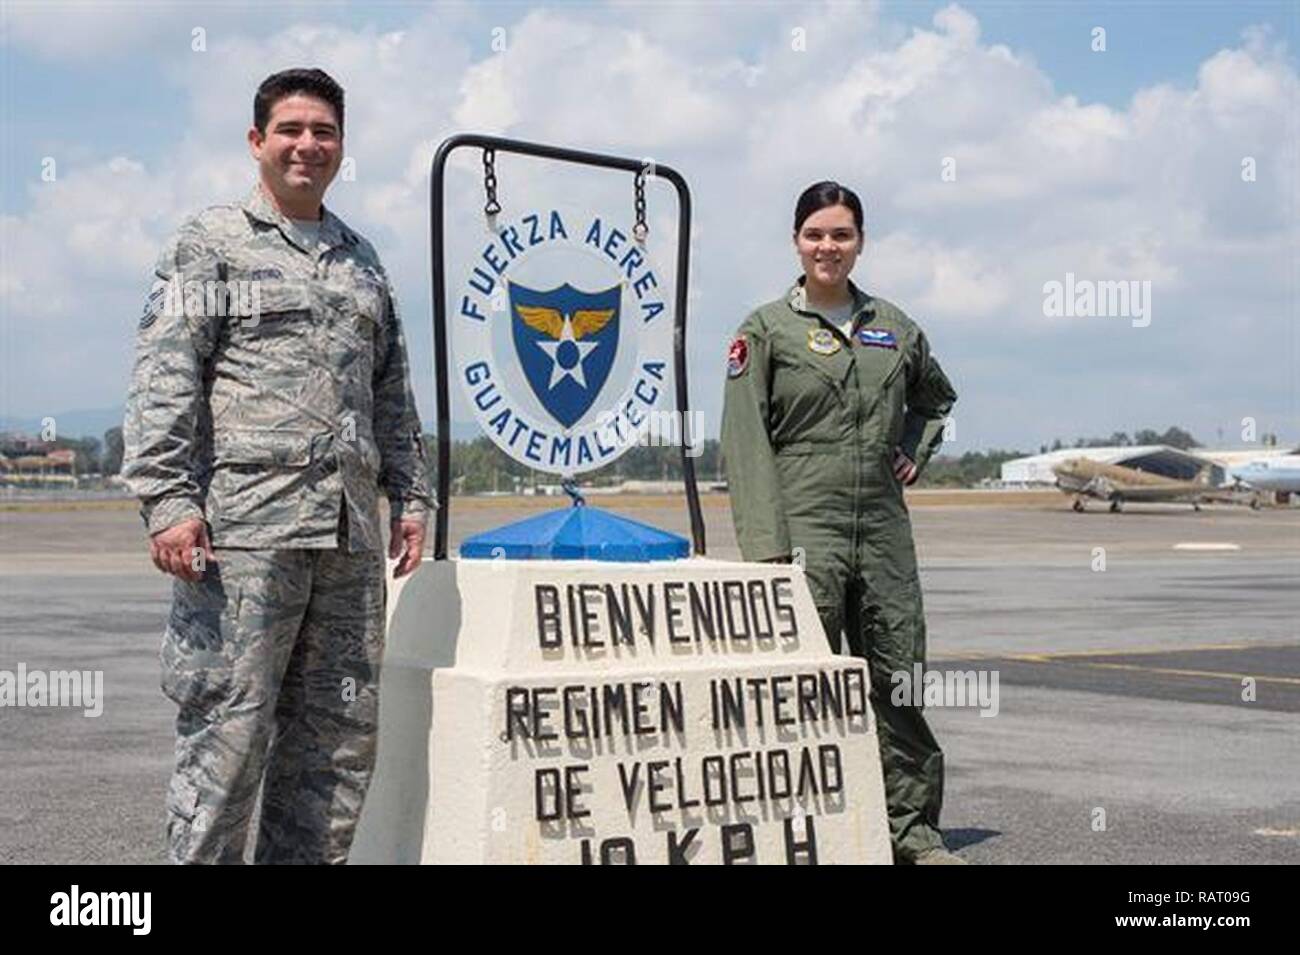 Master Sgt. Alejandro Medina, 571st Mobility Support Advisory Squadron air advisor, takes a picture with his daughter Senior Airman Giannina, sensor operator at Creech AFB, Nevada, during a training mission at La Aurora Air Base, Guatemala. Stock Photo